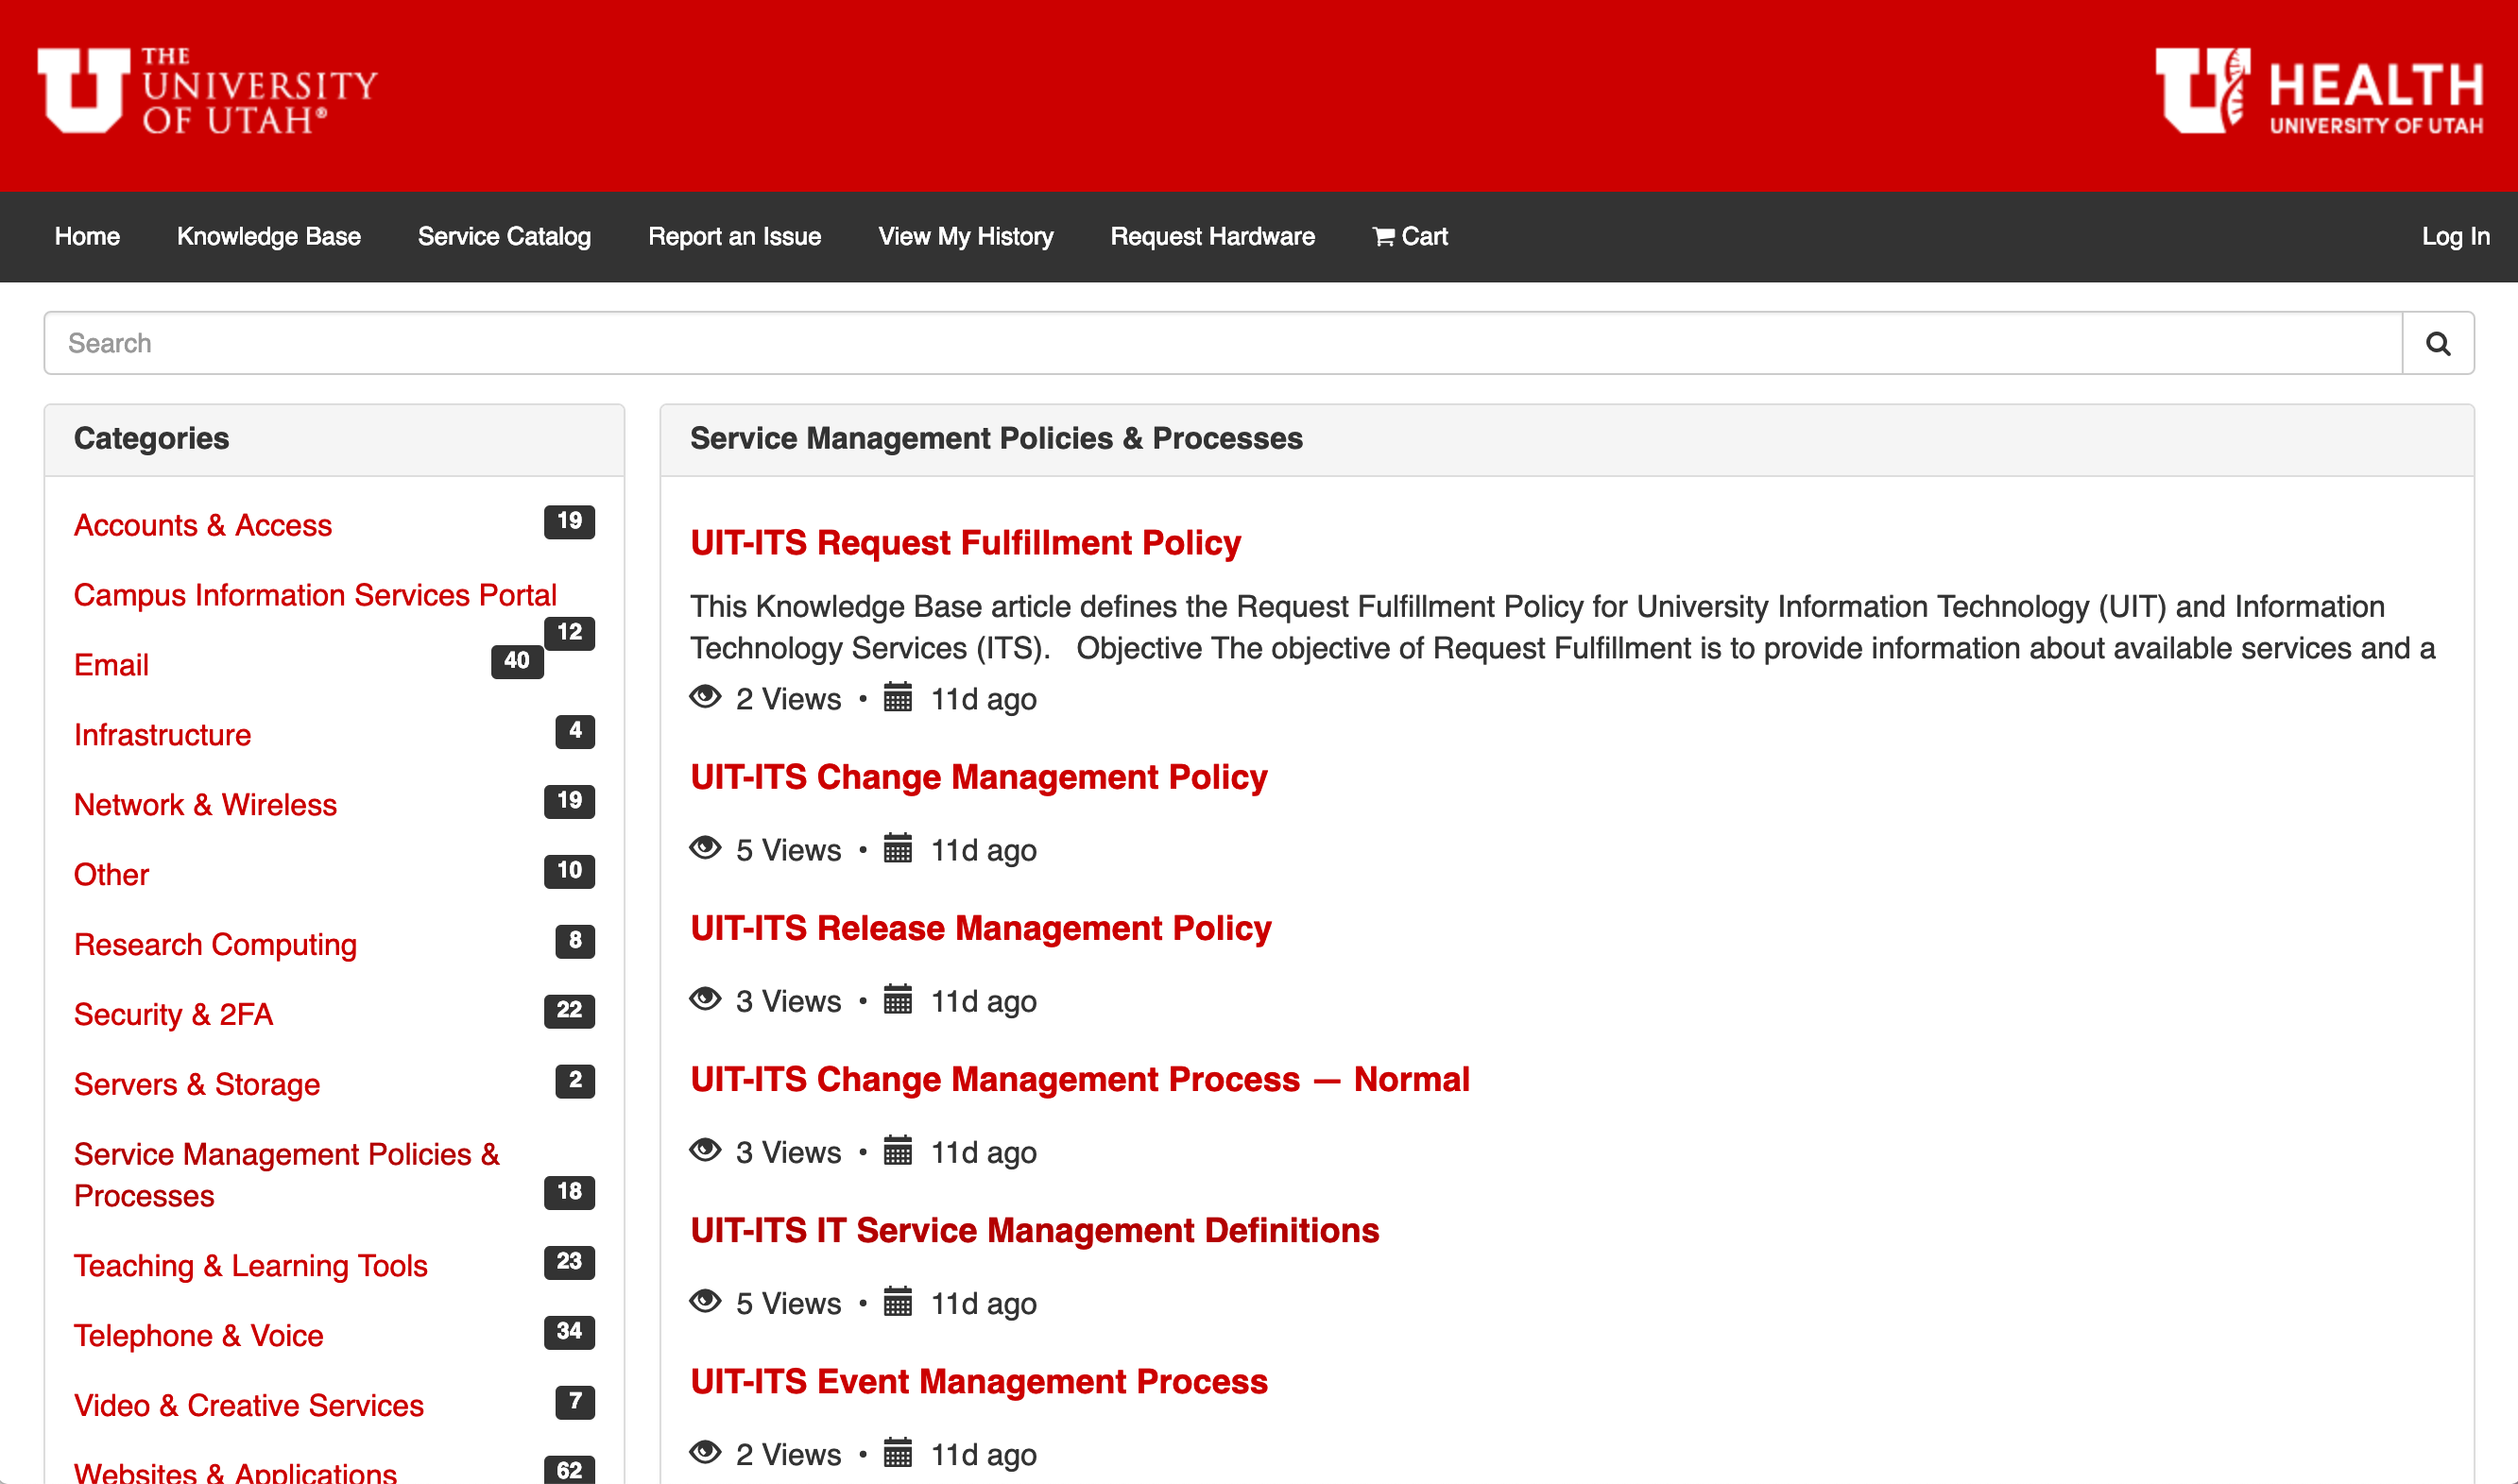 IT Service Management policy and process documents are now available in the public IT Knowledge Base.